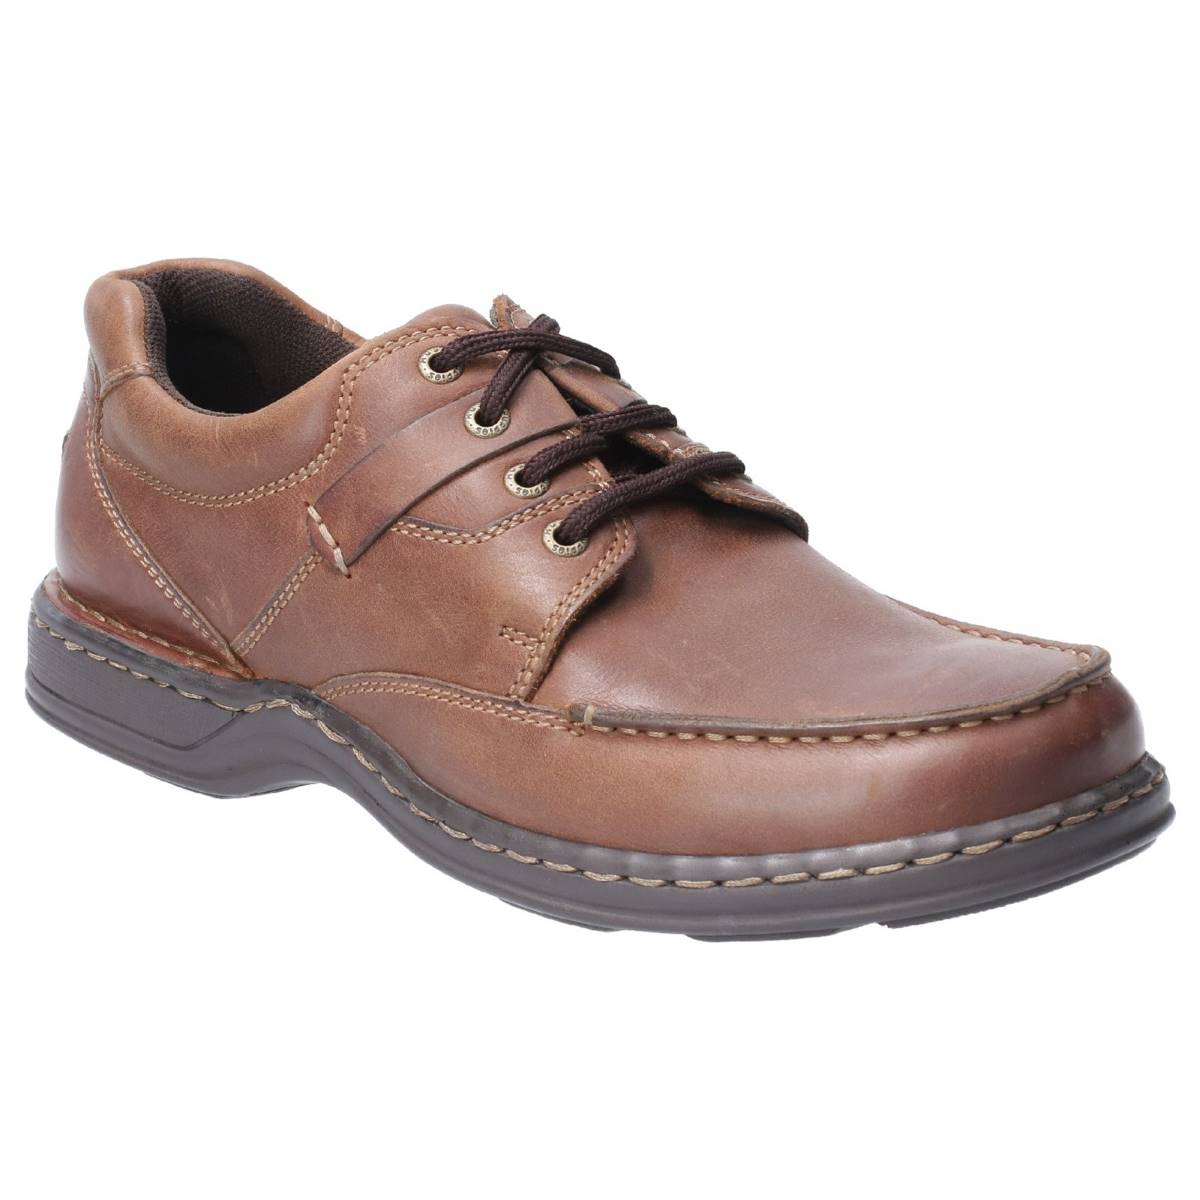 Hush Puppies Randall Ii Brown Mens comfort shoes HPM2000-62-2 in a Plain Leather in Size 13